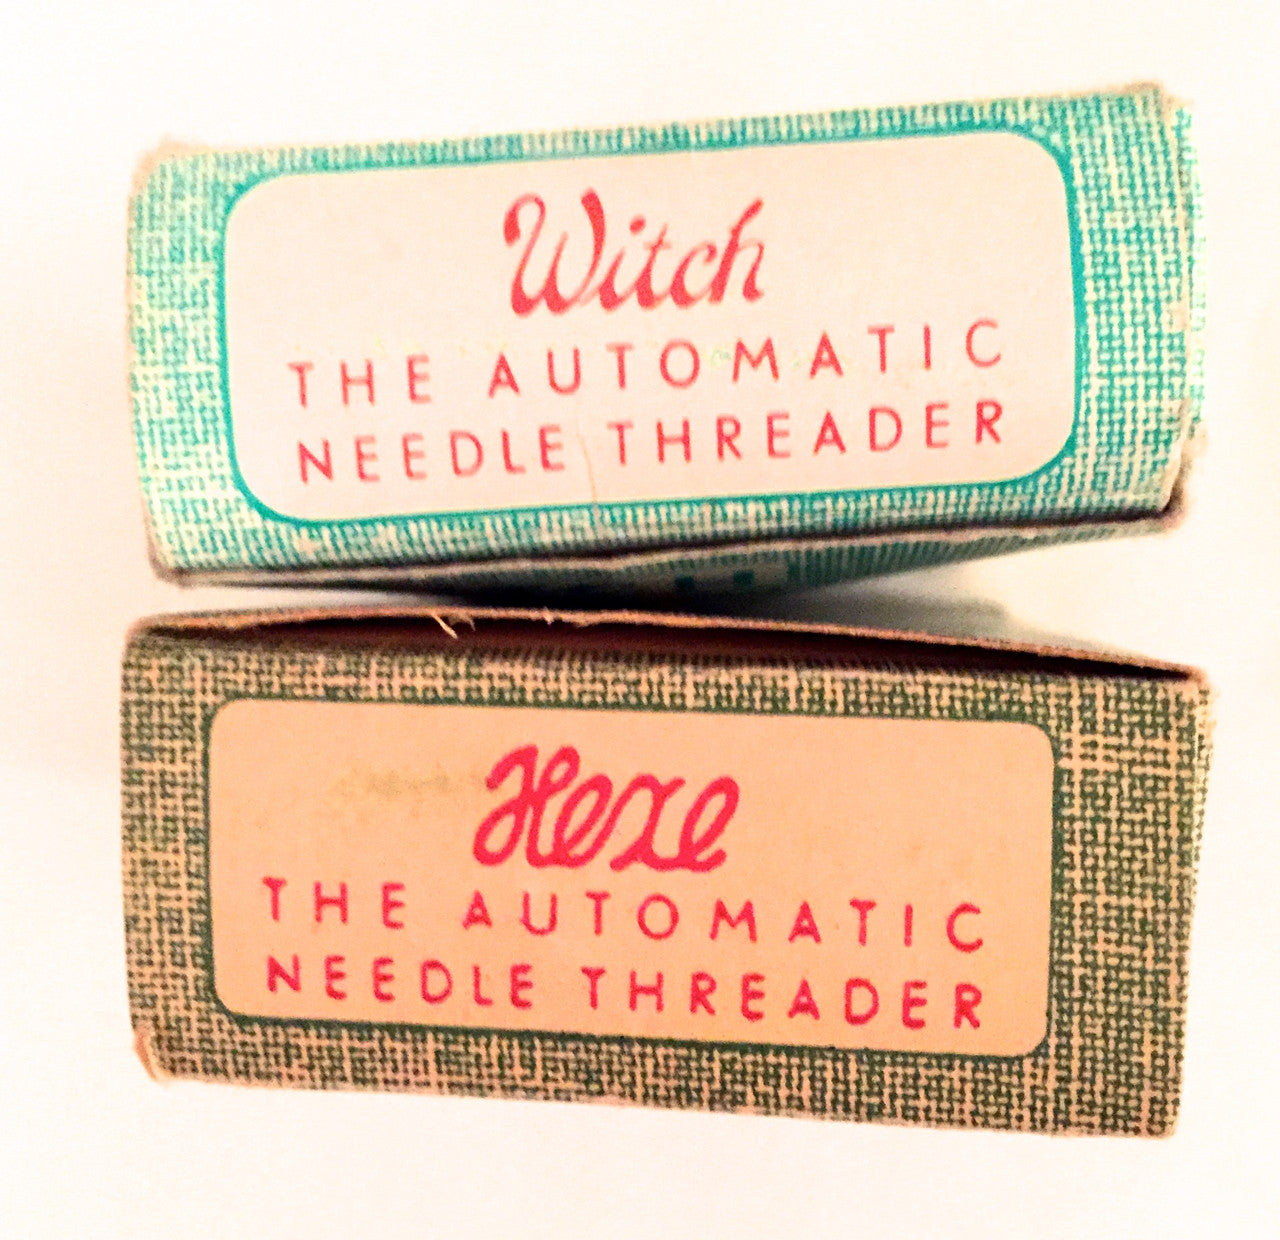 Hexe & Witch Needle Threaders - visiblemending